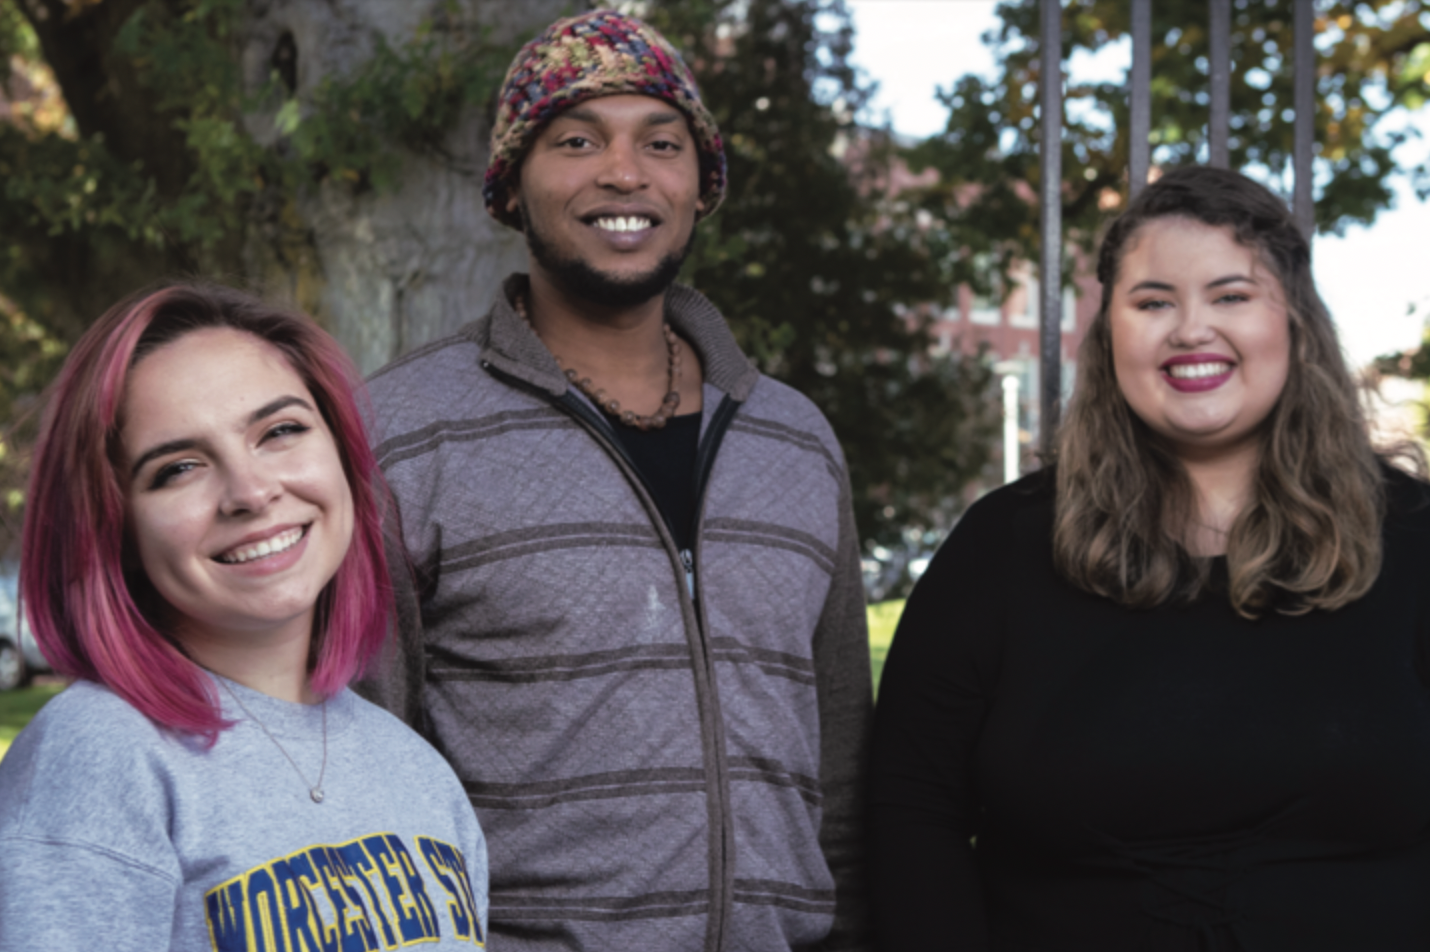 Three Worcester State students smiling for a photo on campus